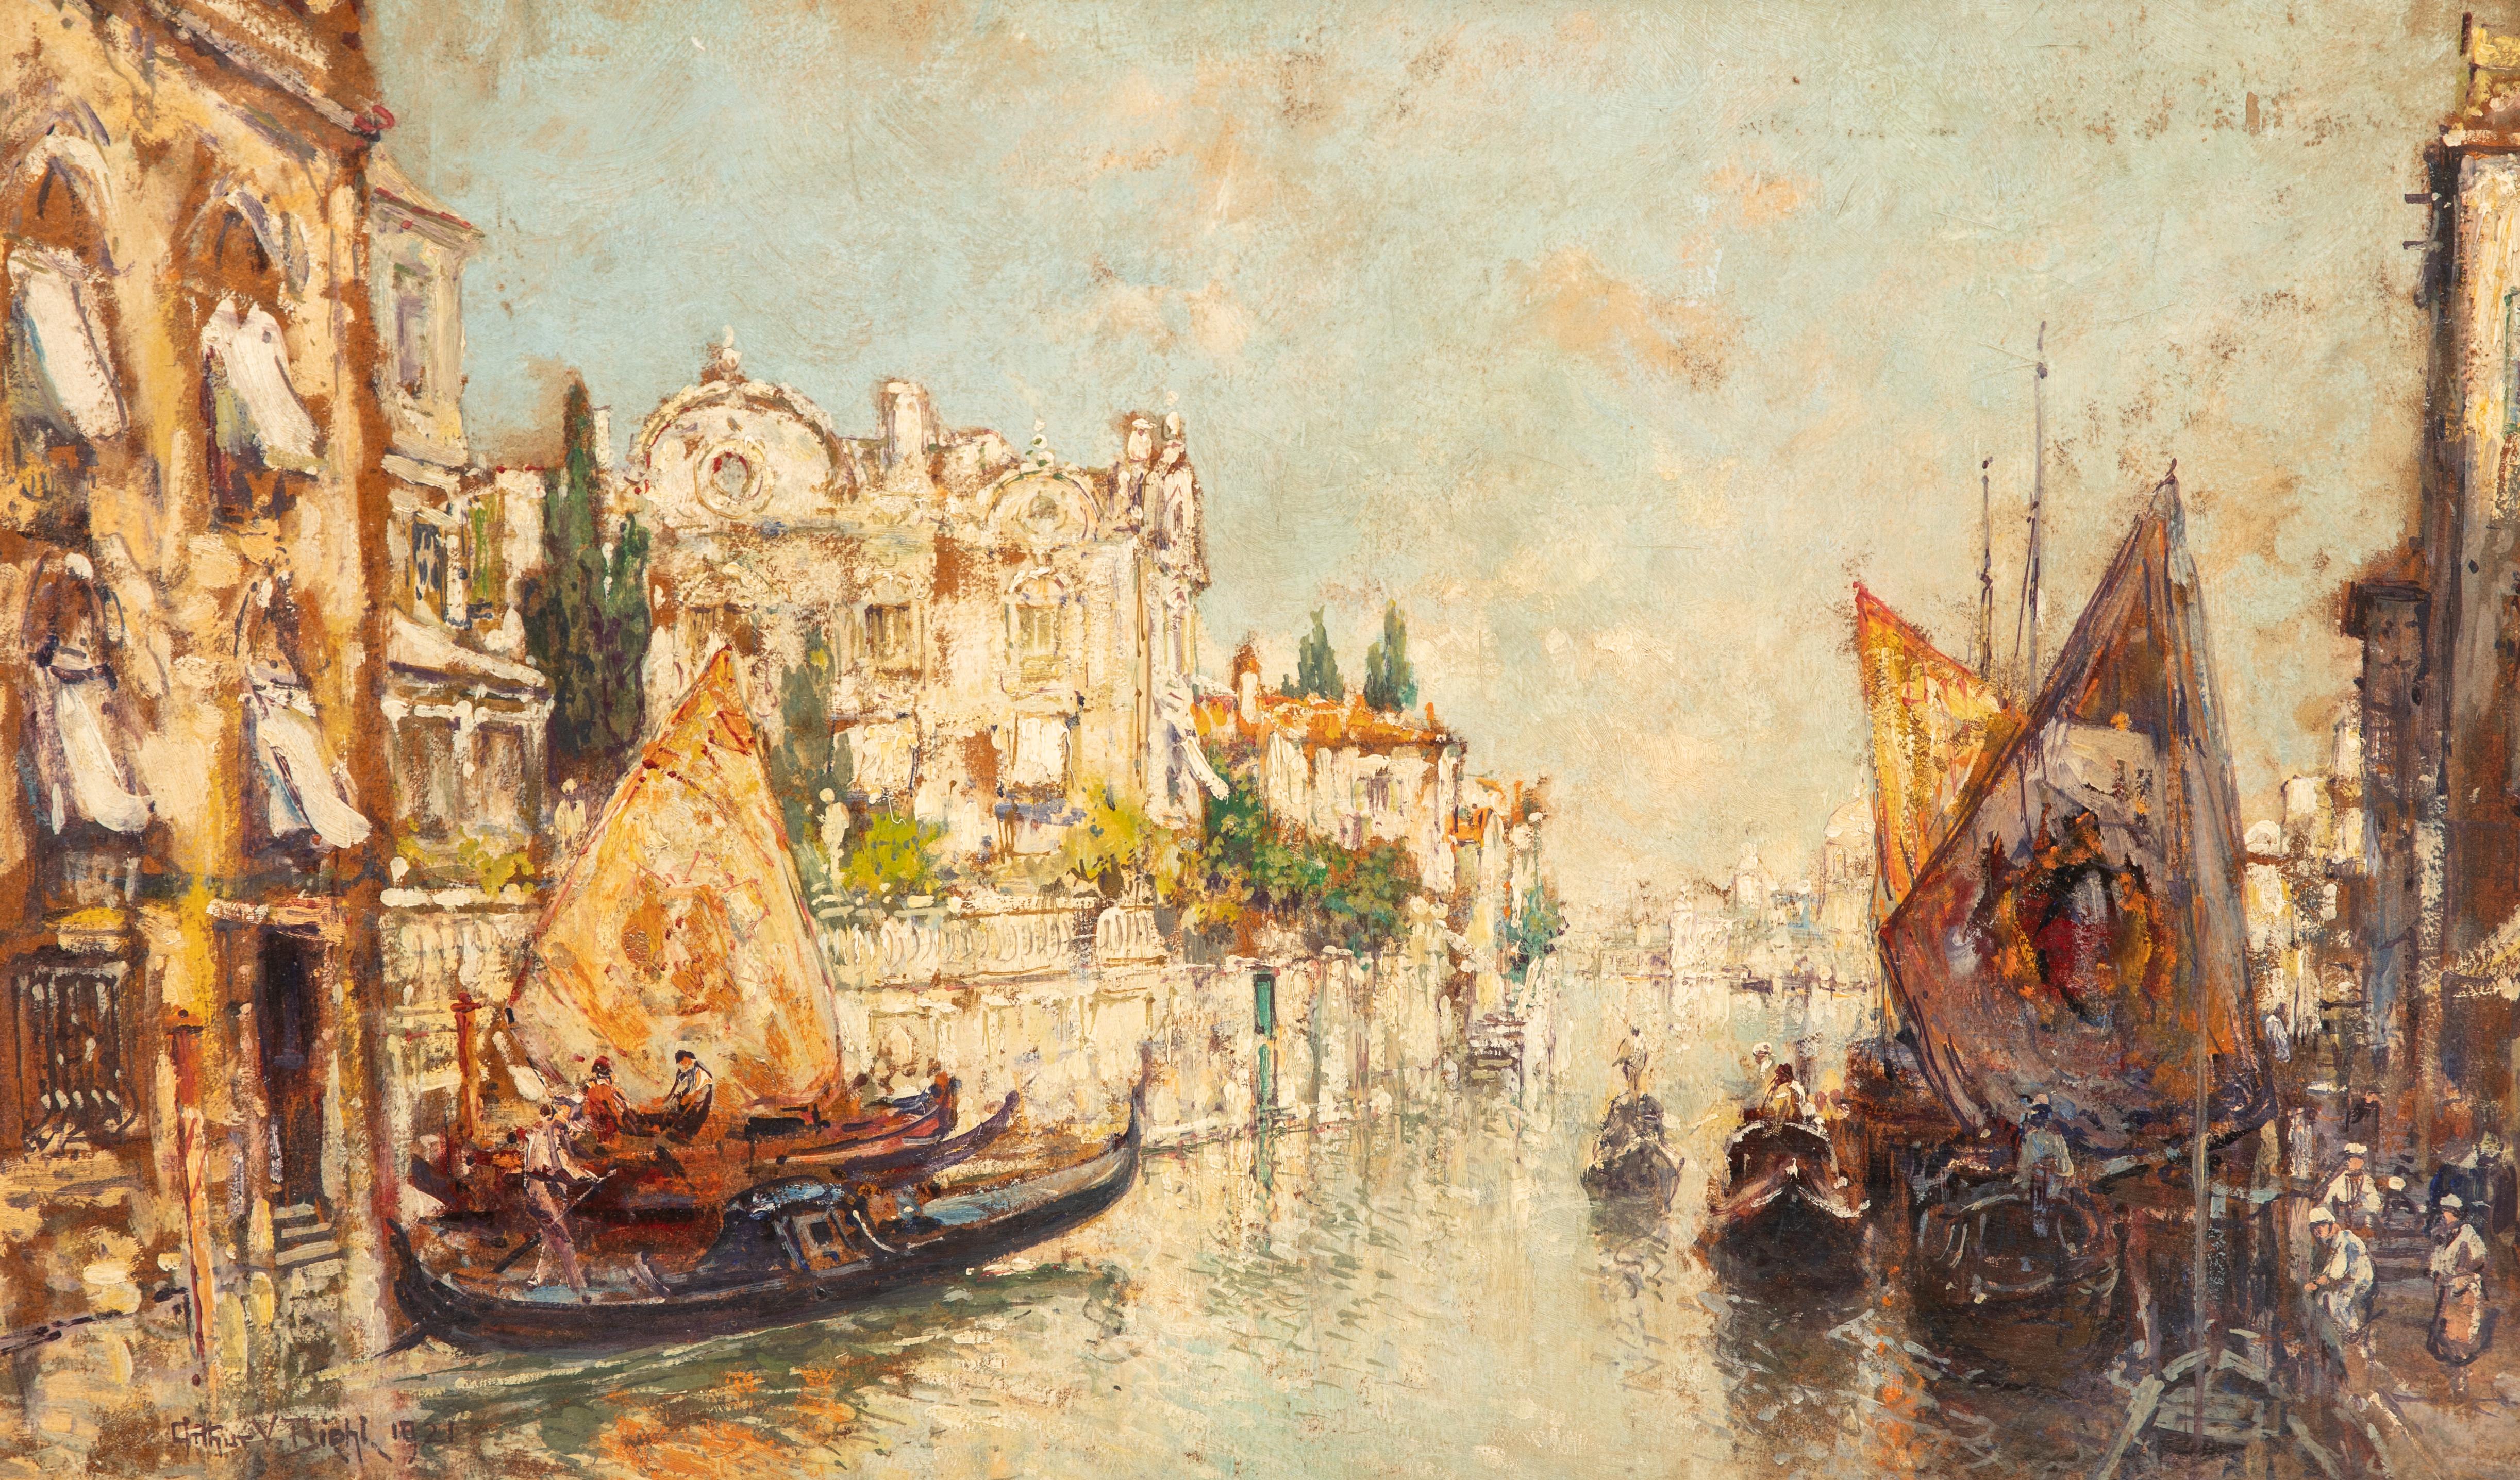 Arthur Diehl signed oil painting of Venetian canal scene, 1921. Arthur Diehl was born in England in 1870, to a novelist mother and a father who was the director of an opera company. He left his studies at Oxford University at the age of nineteen to